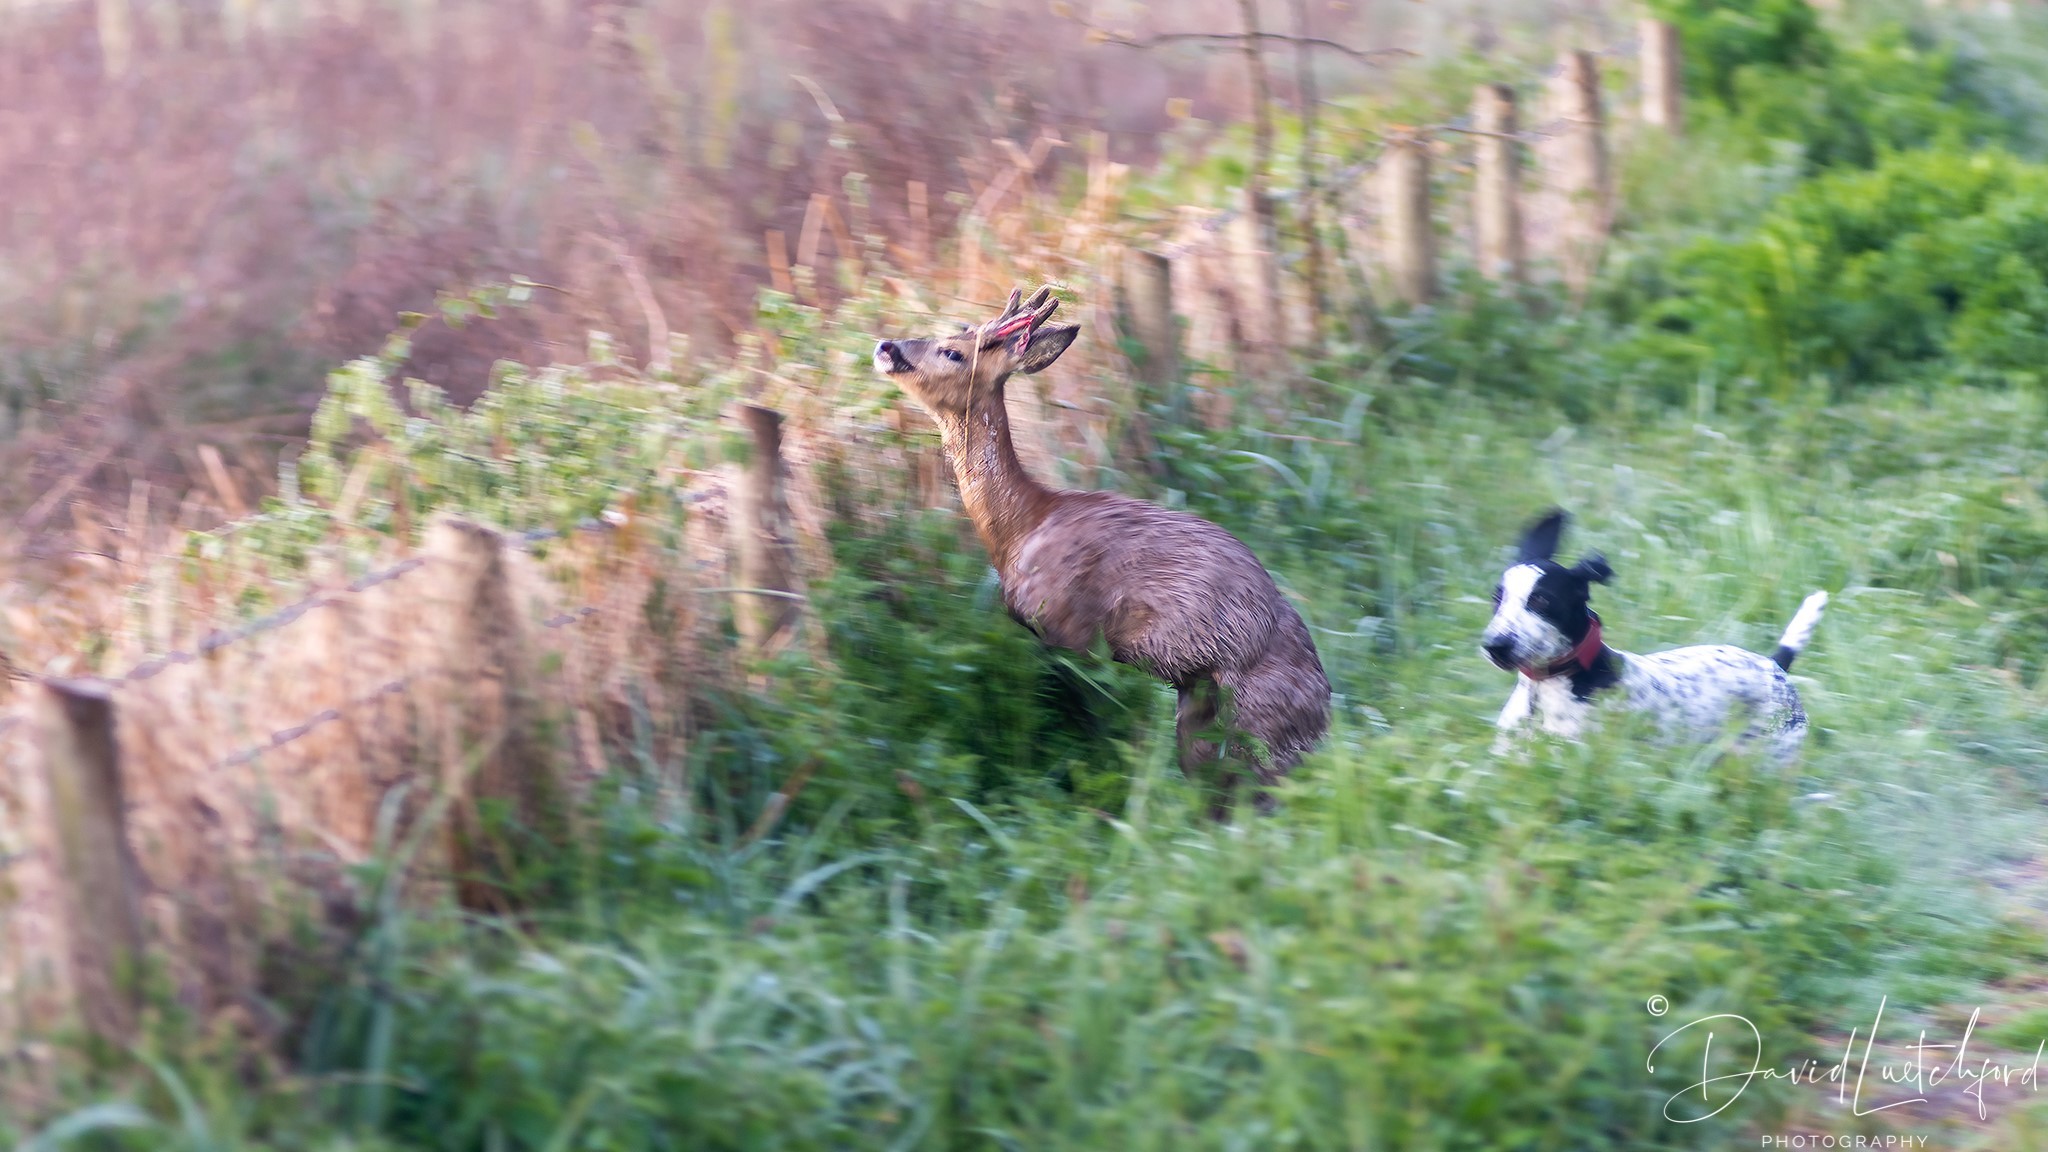 The photos show a dog chasing the roebuck at Titchfield Canal and were captured by David Luetchford, who is trying to raise awareness.